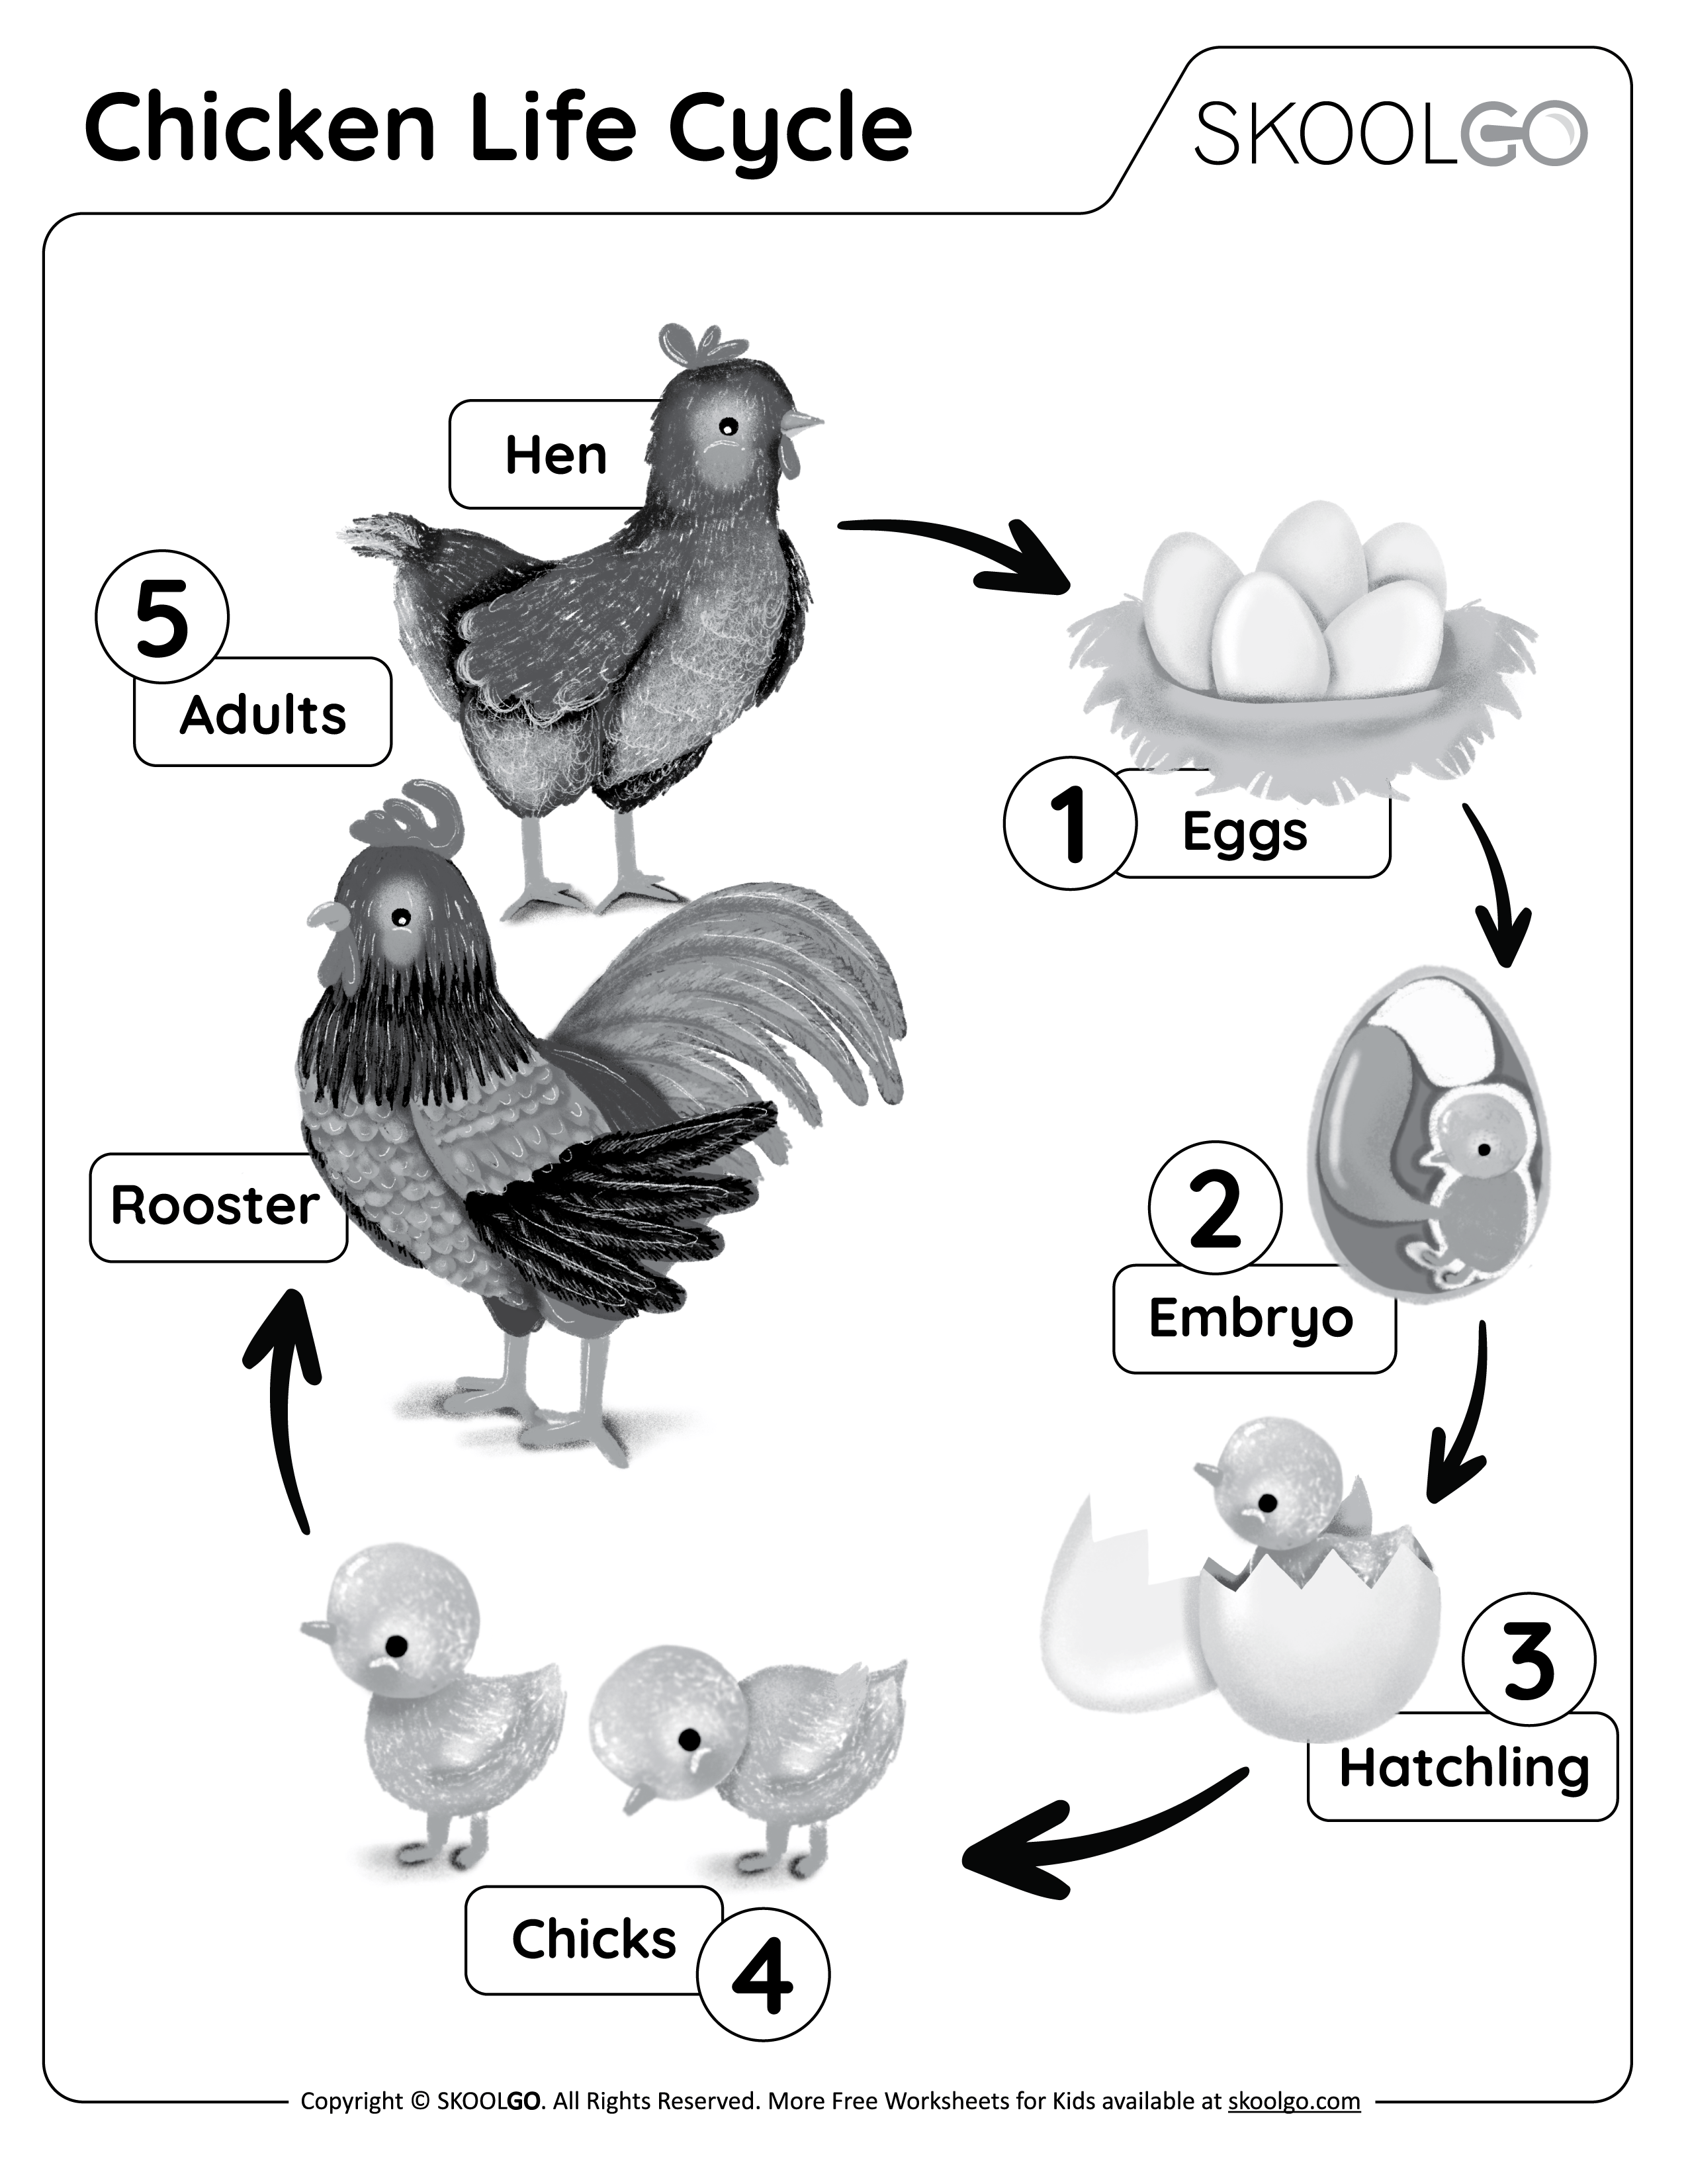 Chicken Life Cycle - Free Black and White Worksheet for Kids